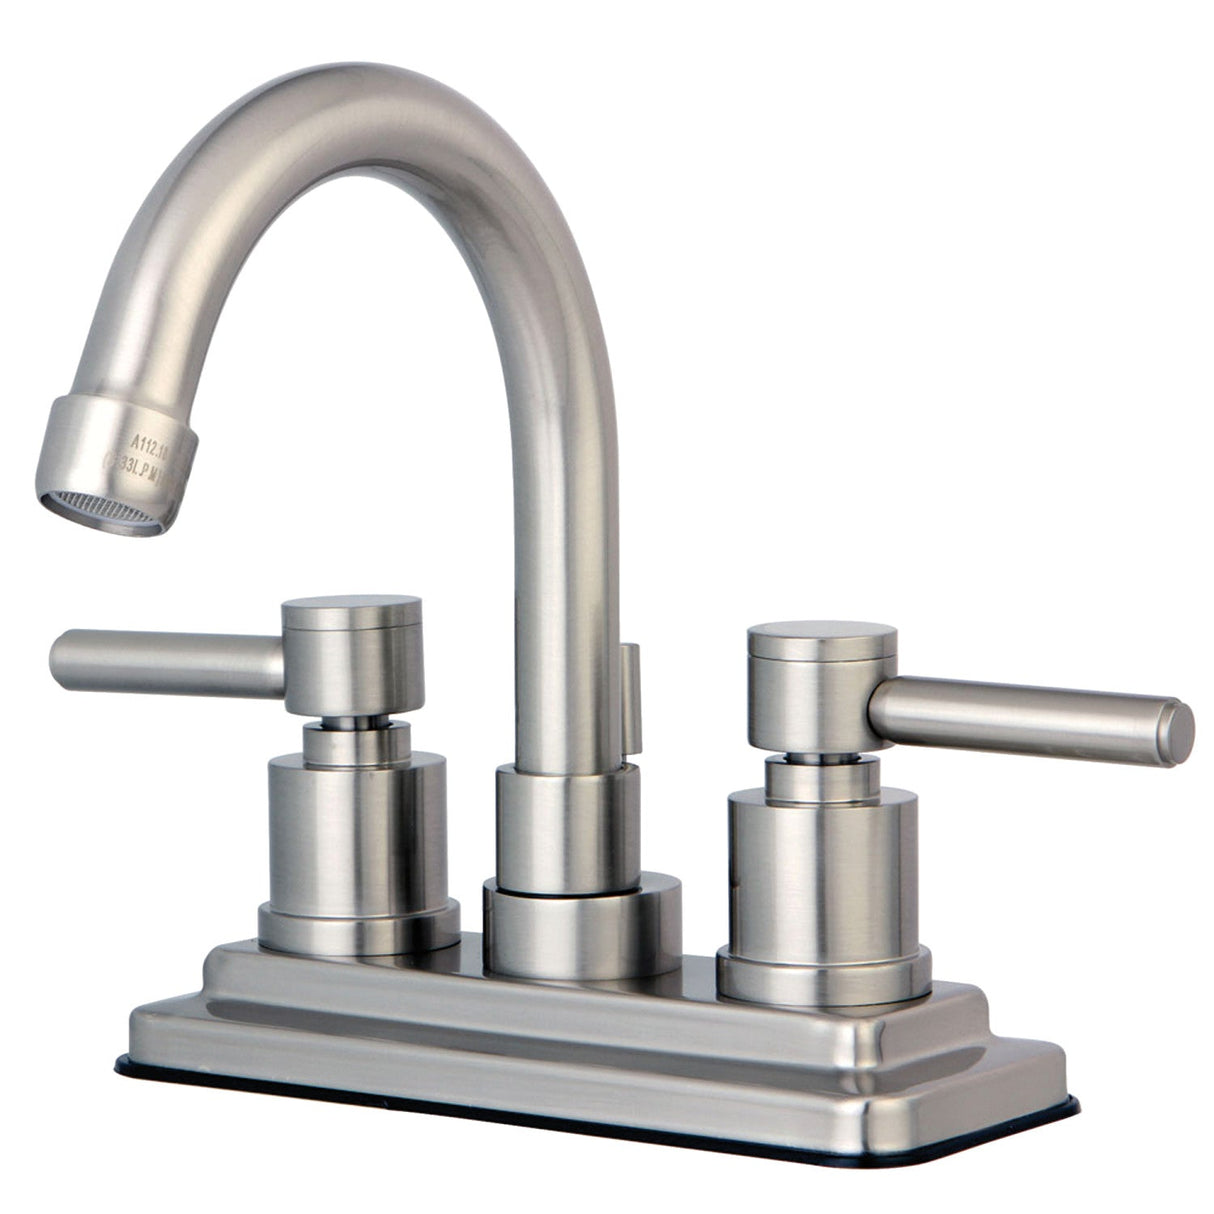 Concord KS8668DL Two-Handle 3-Hole Deck Mount 4" Centerset Bathroom Faucet with Brass Pop-Up, Brushed Nickel